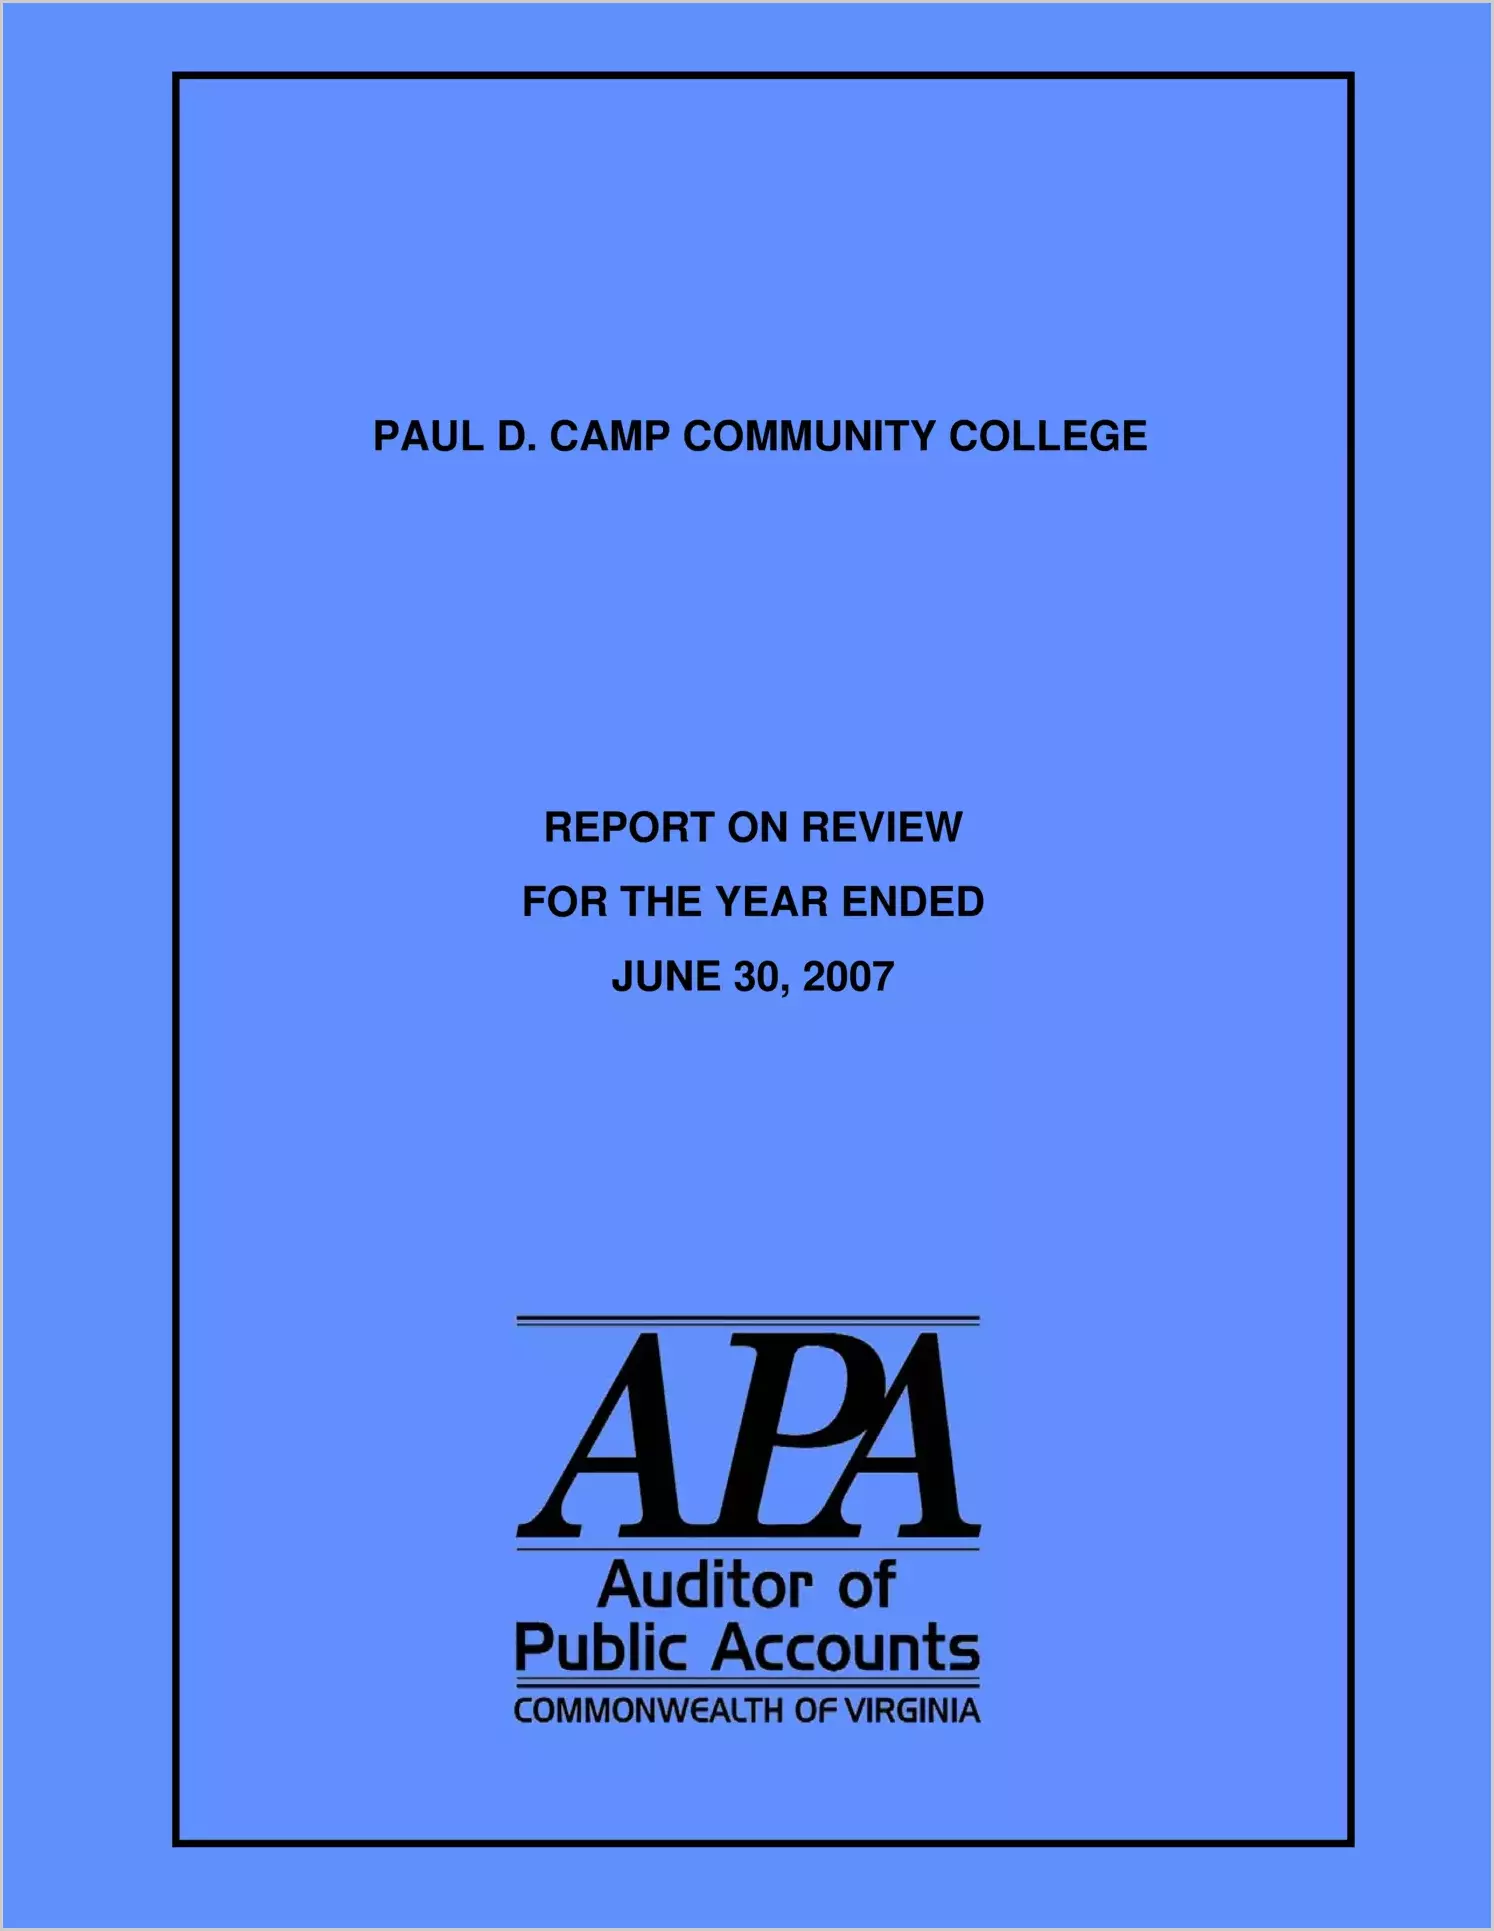 Paul D. Camp Community College report on review for the year ended June 30, 2007